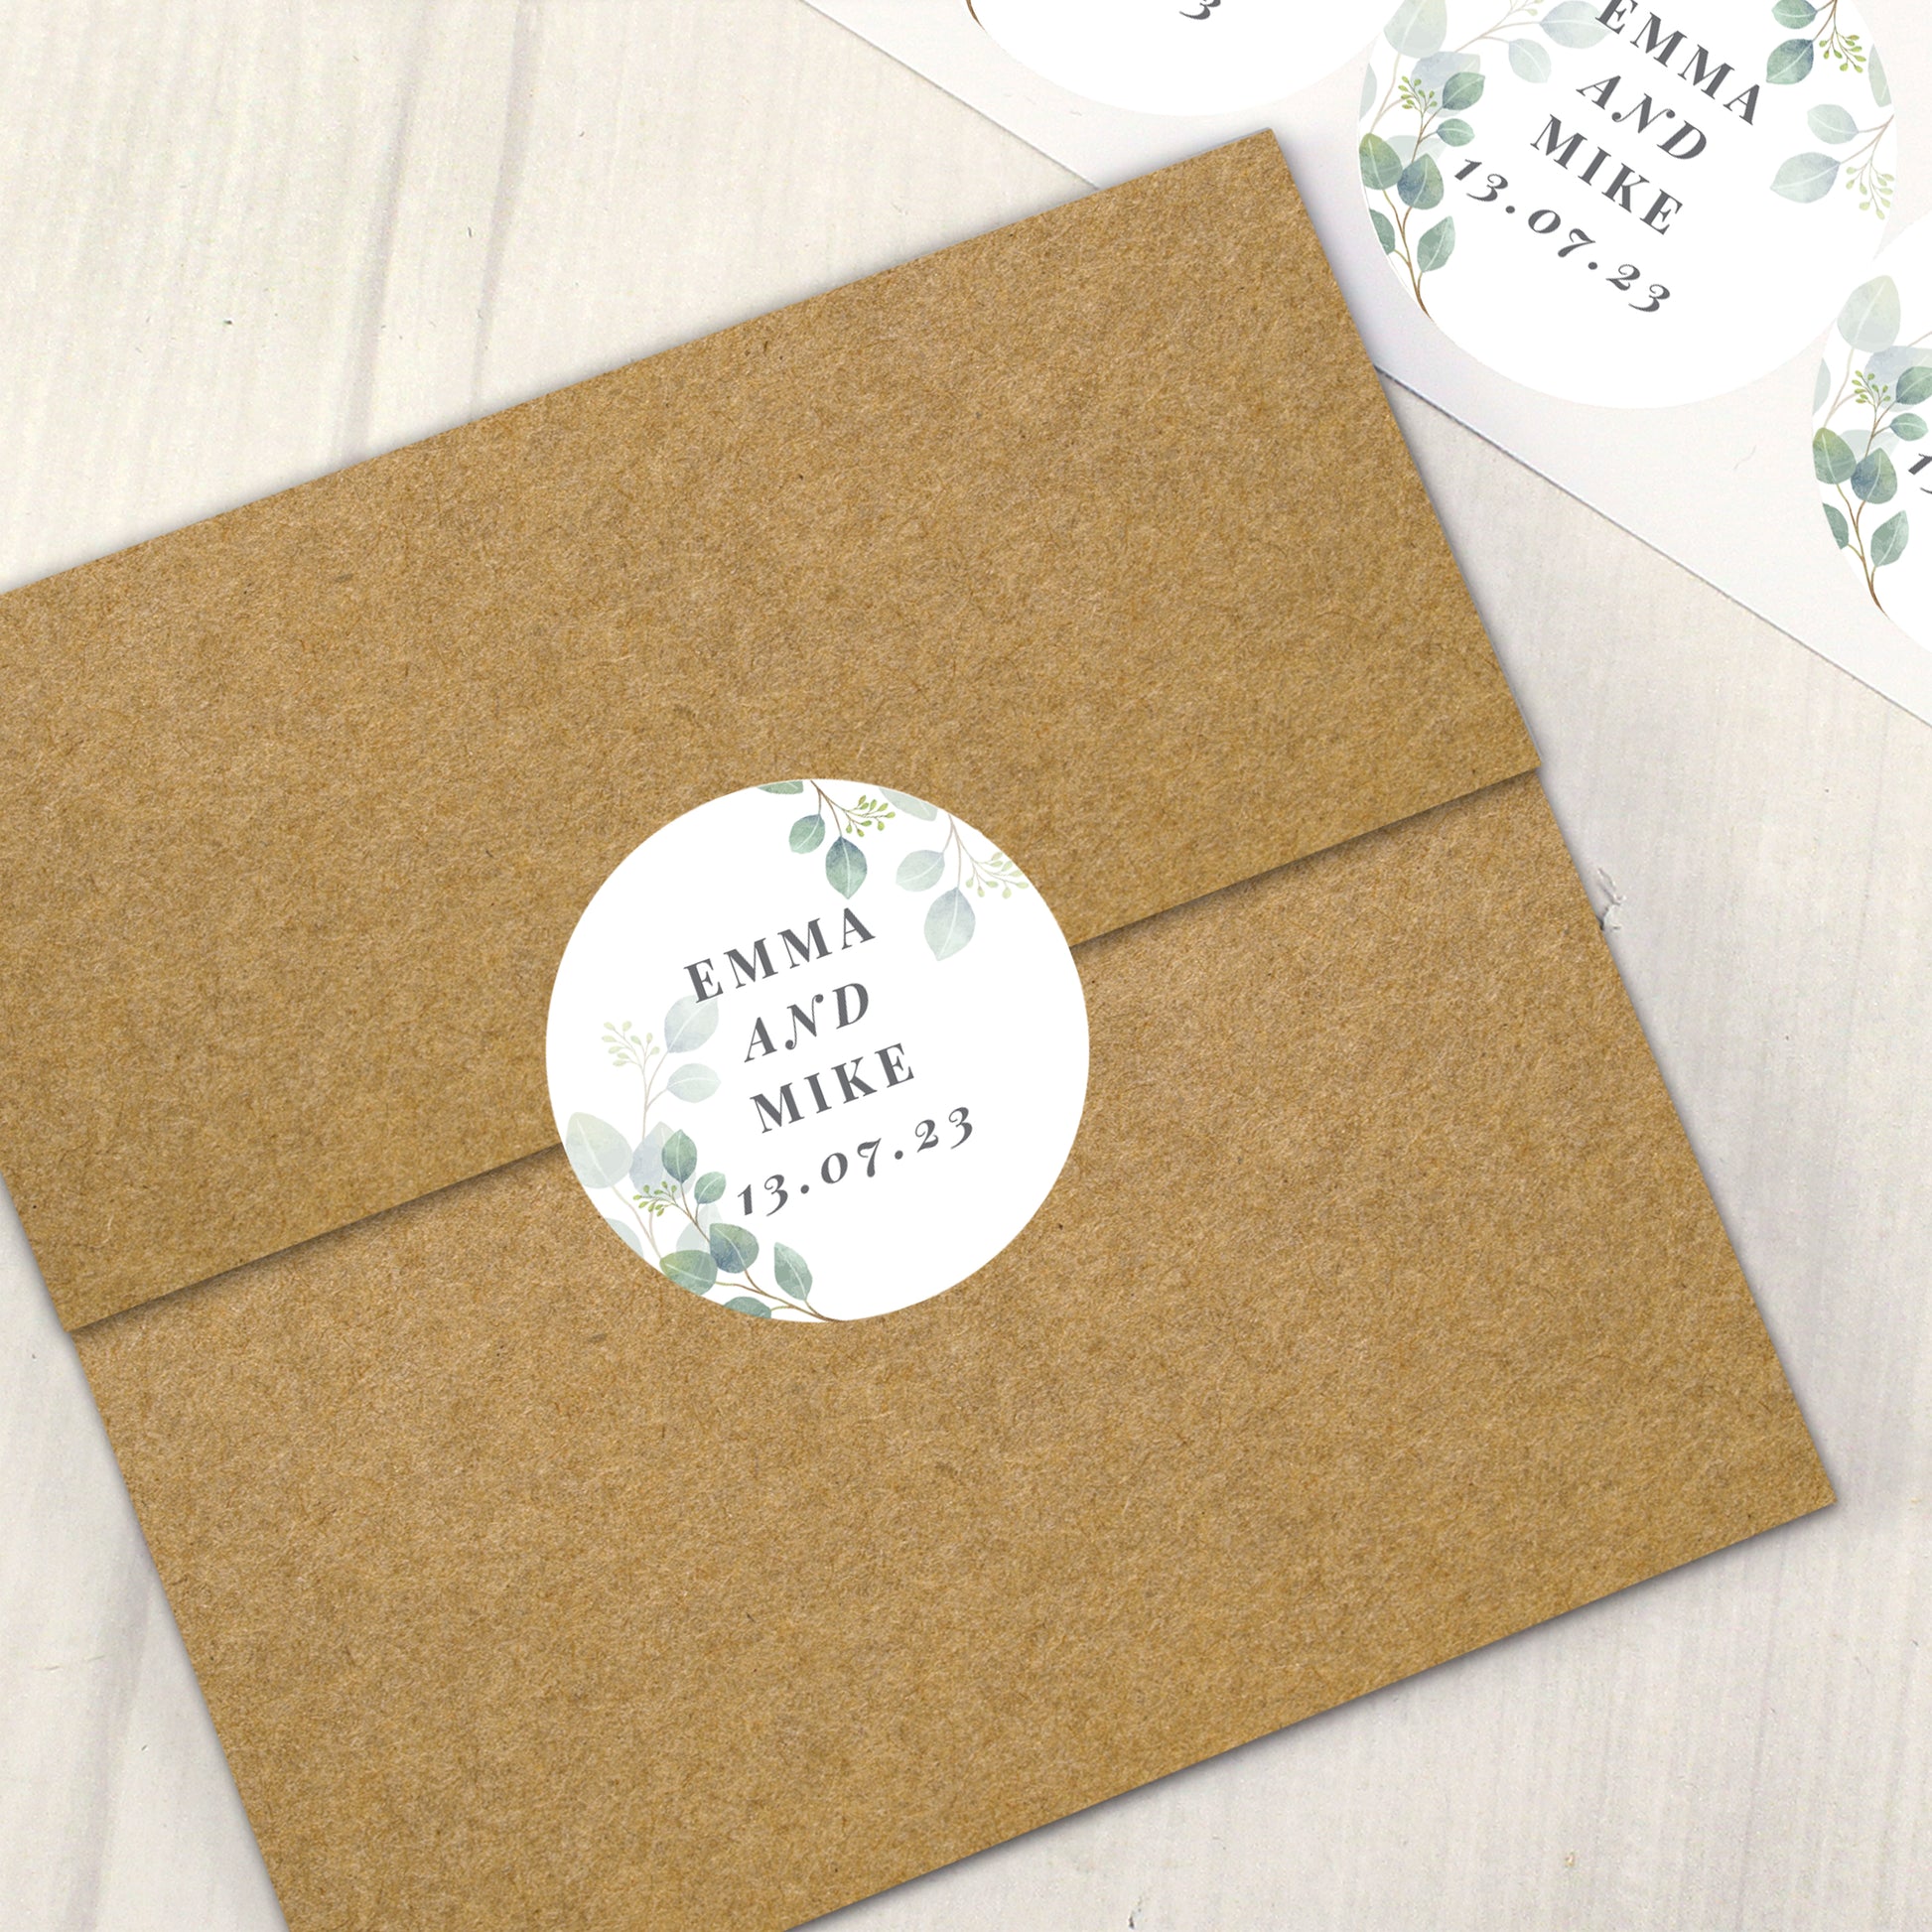 Personalised wedding sticky labels with pretty summer leafe design. Four lines of text, with second and fourth lines in italics.